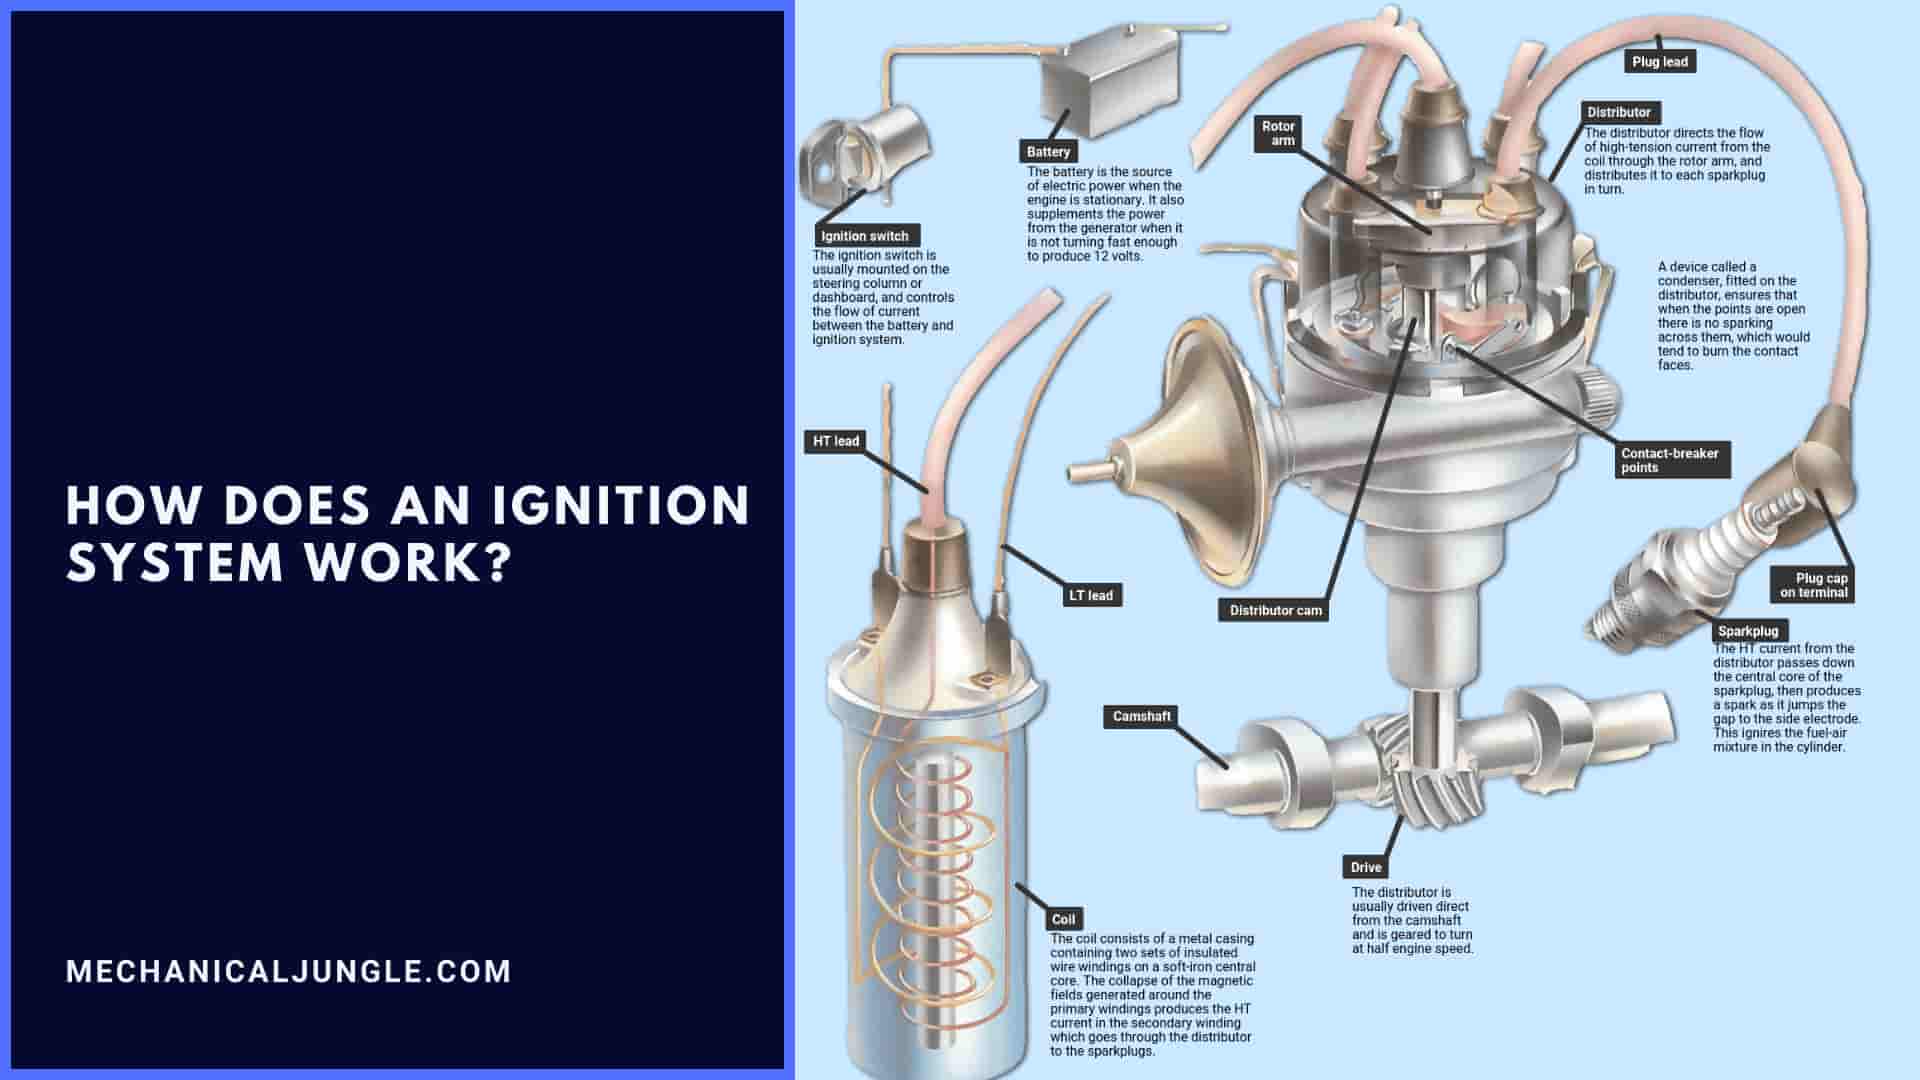 How Does an Ignition System Work